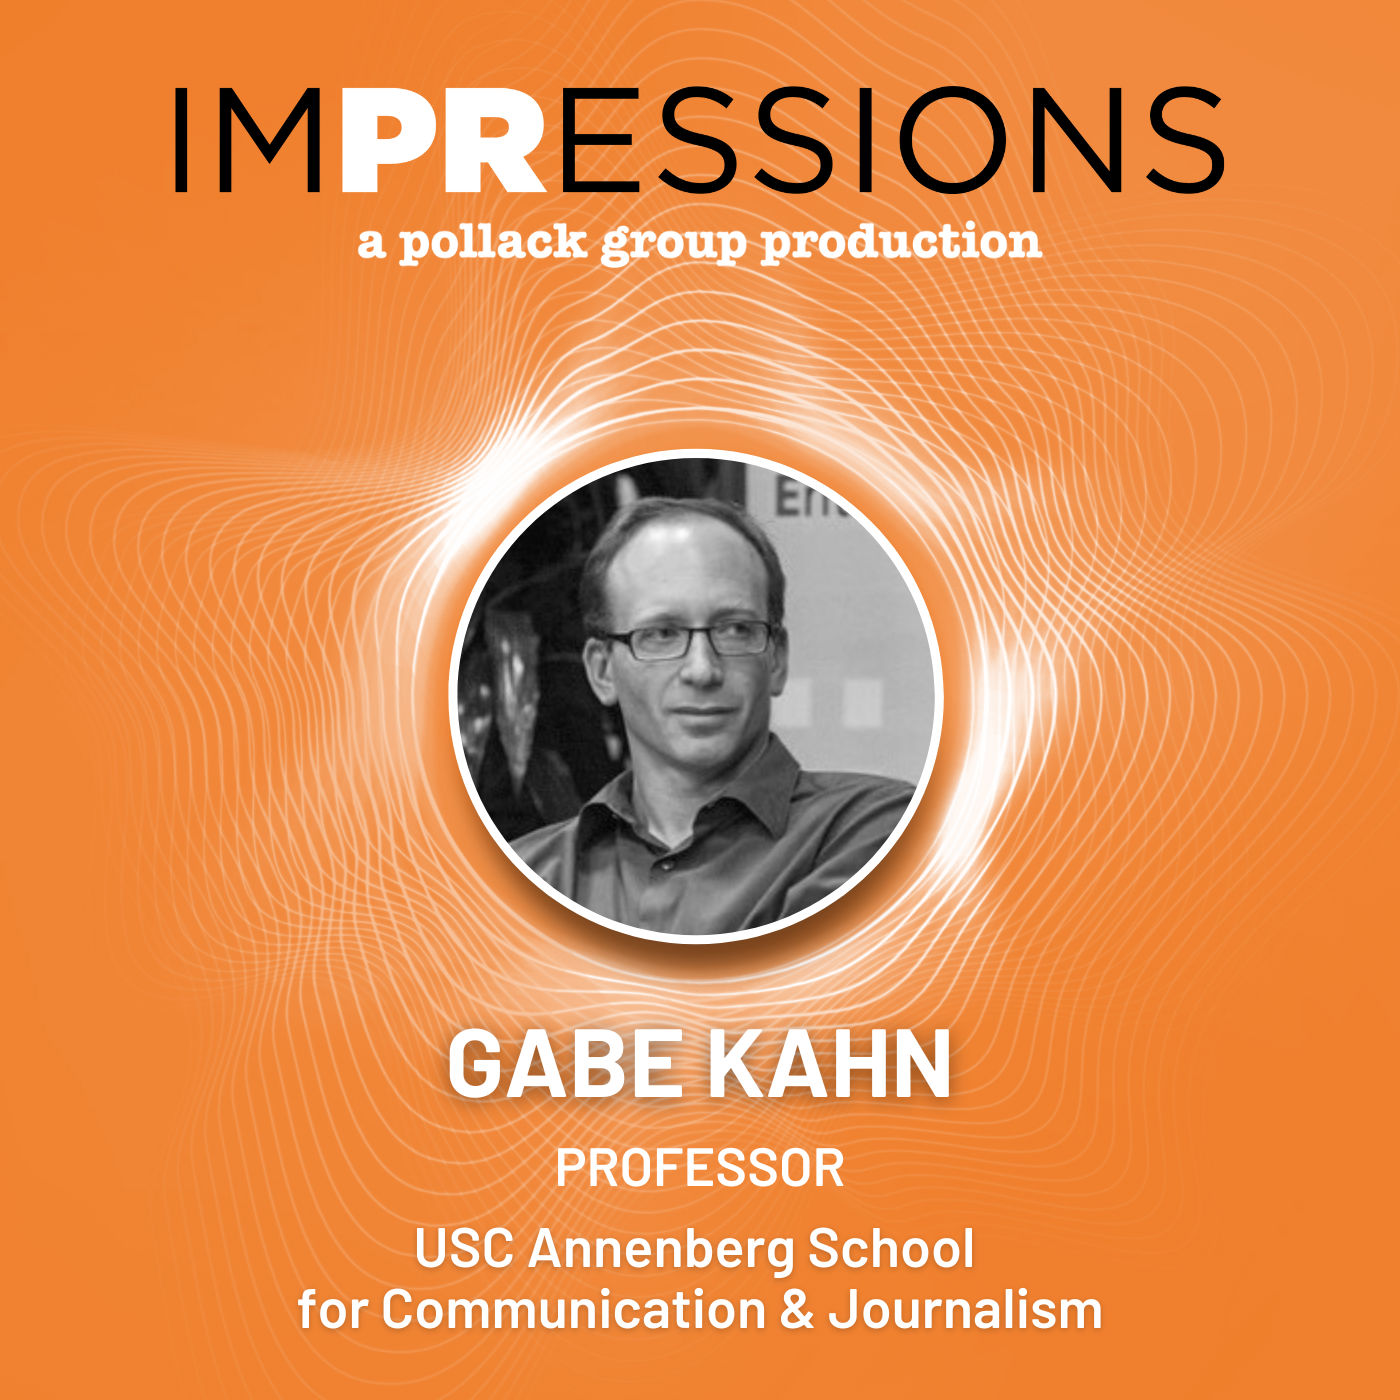 Promotional graphic with text and portrait of a professor from USC Annenberg School.